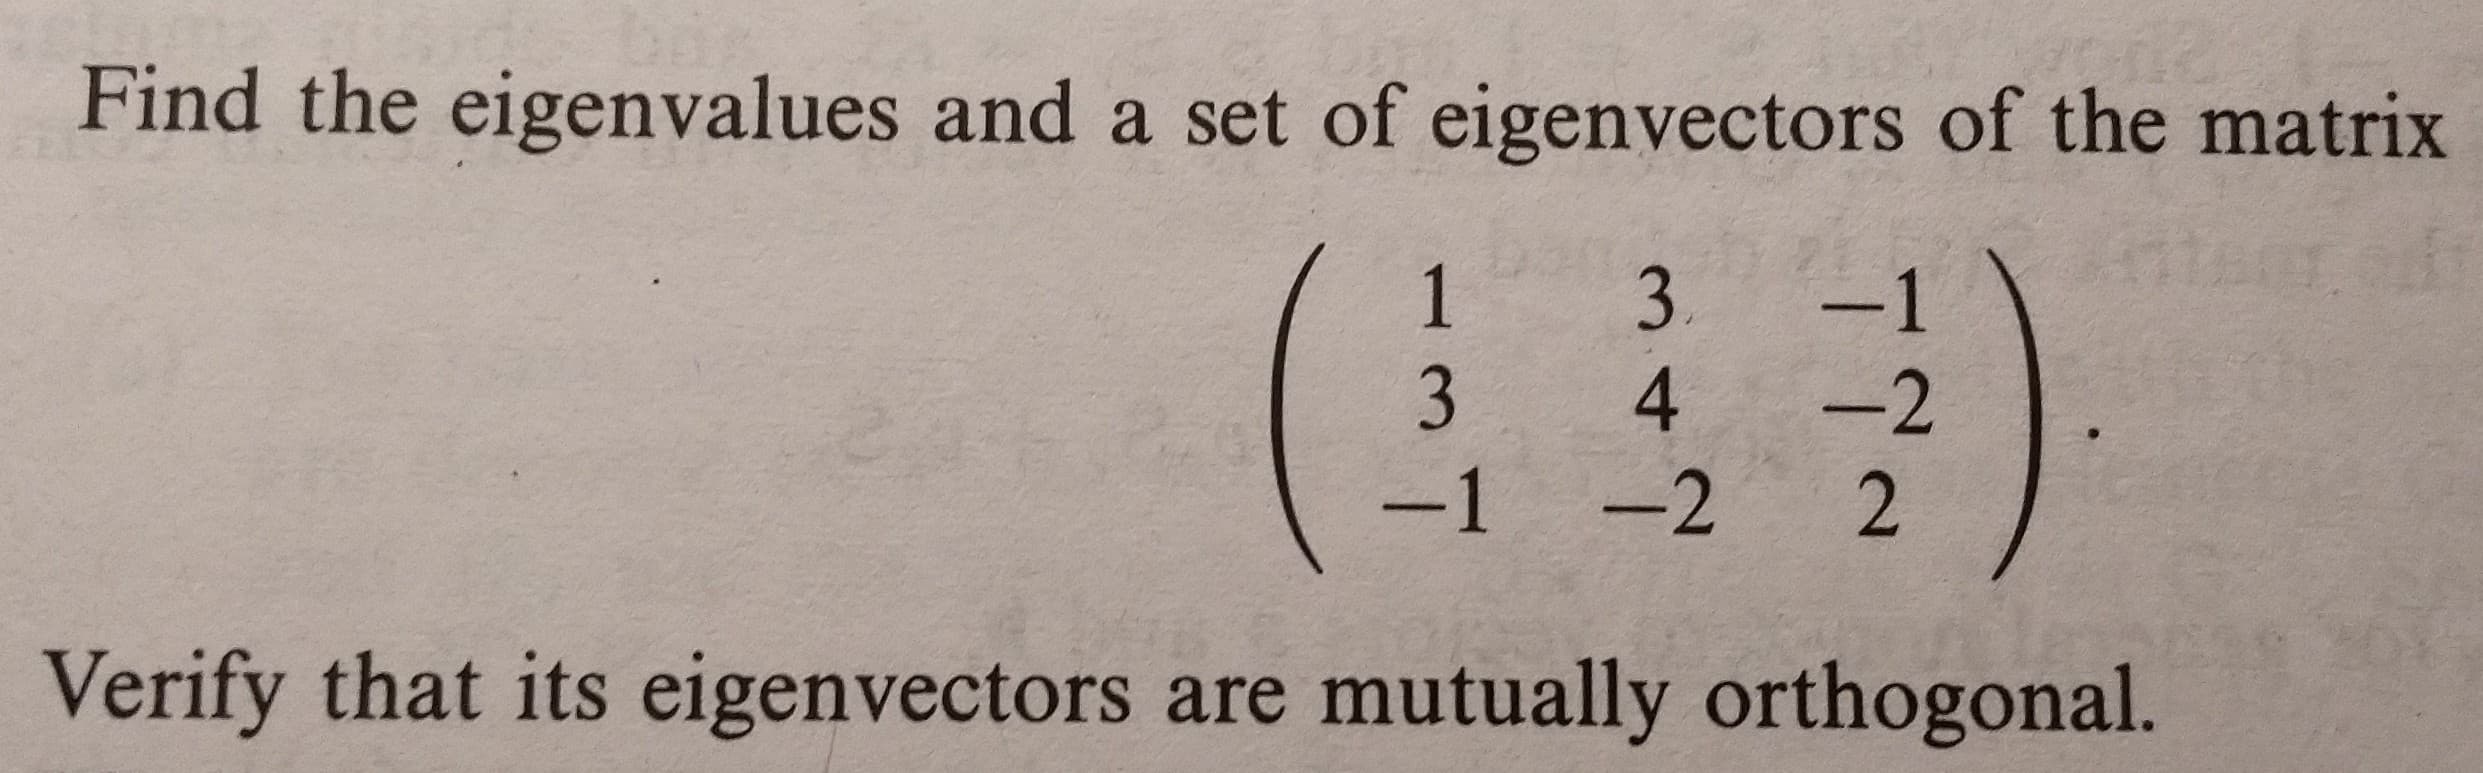 Find the eigenvalues and a set of eigenvectors of the matrix
1 3.1
3 4-2
12 2
Verify that its eigenvectors are mutually orthogonal.
